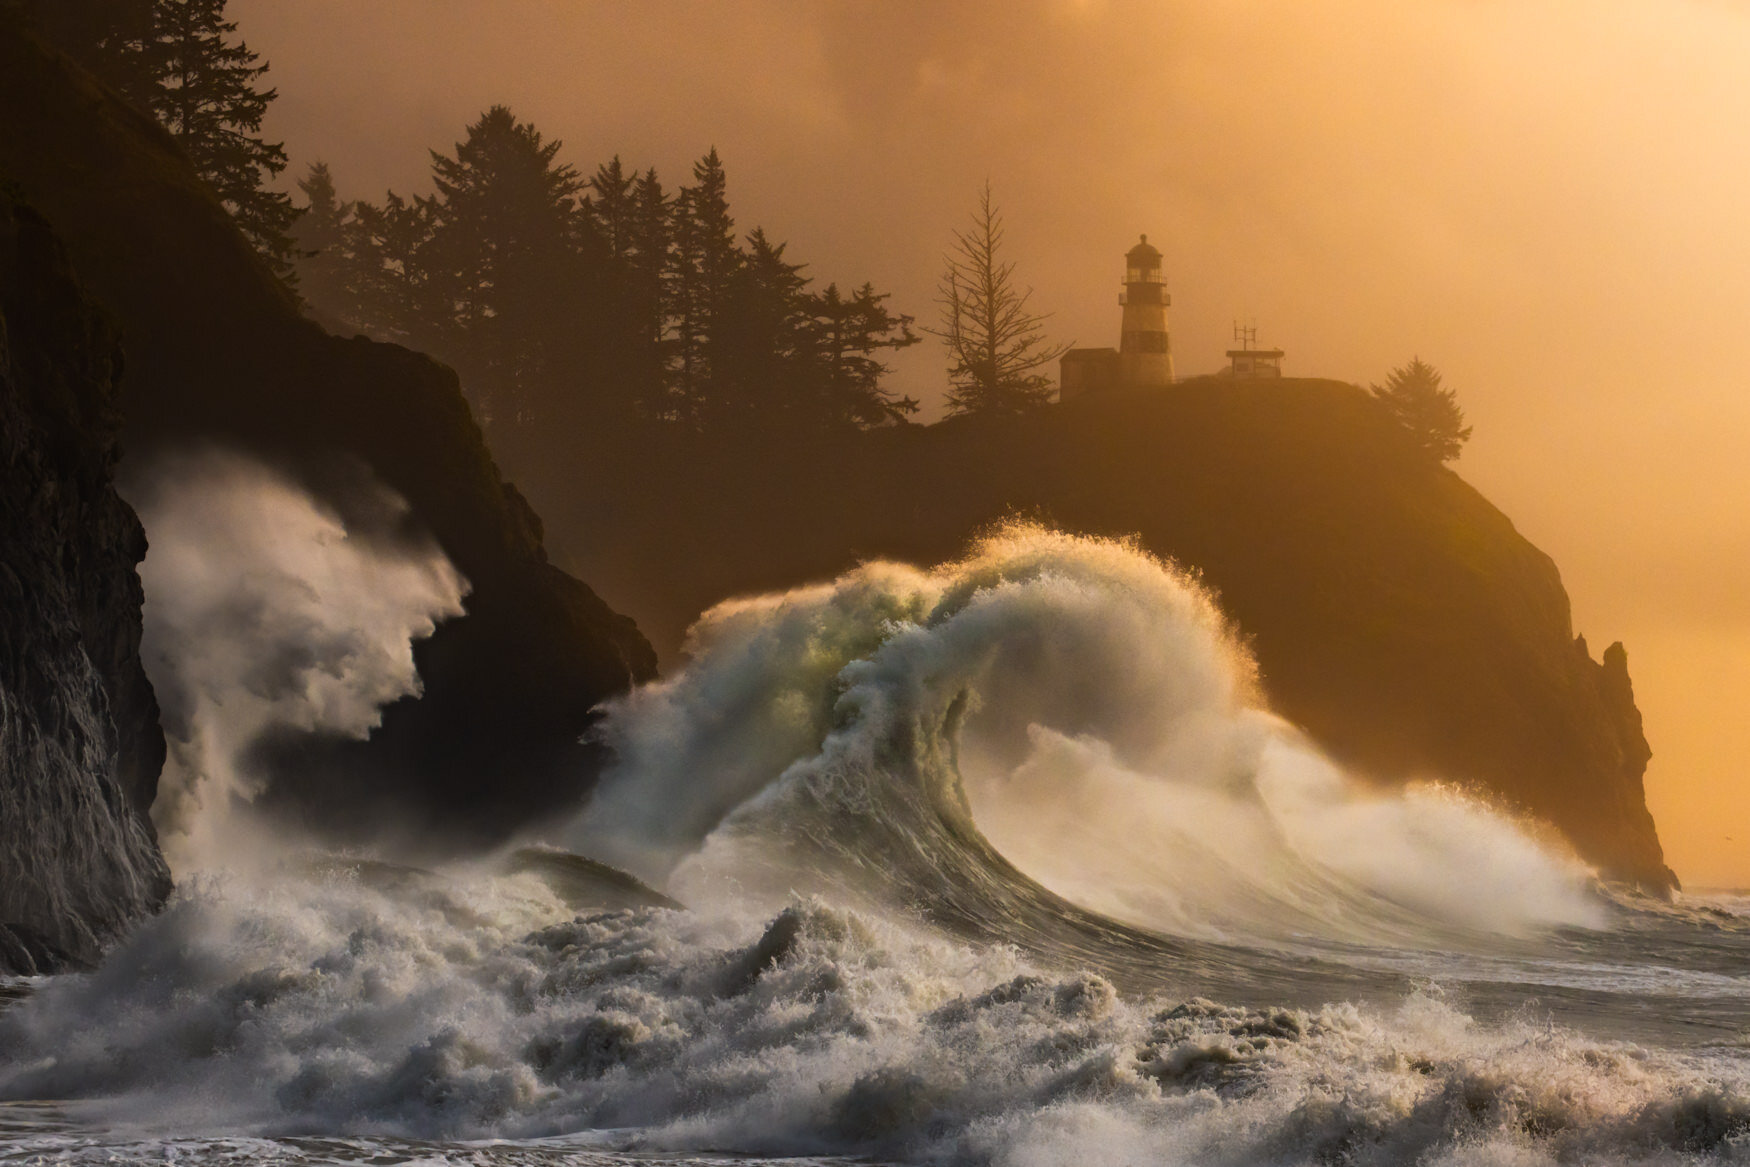 A large wave crashes over a lighthouse at Cape Disappointment in Washington during sunset - photographed by Chris Byrne. | Photo Title: Poseidon Awakes | 
        Photo by Chris Byrne ©2023